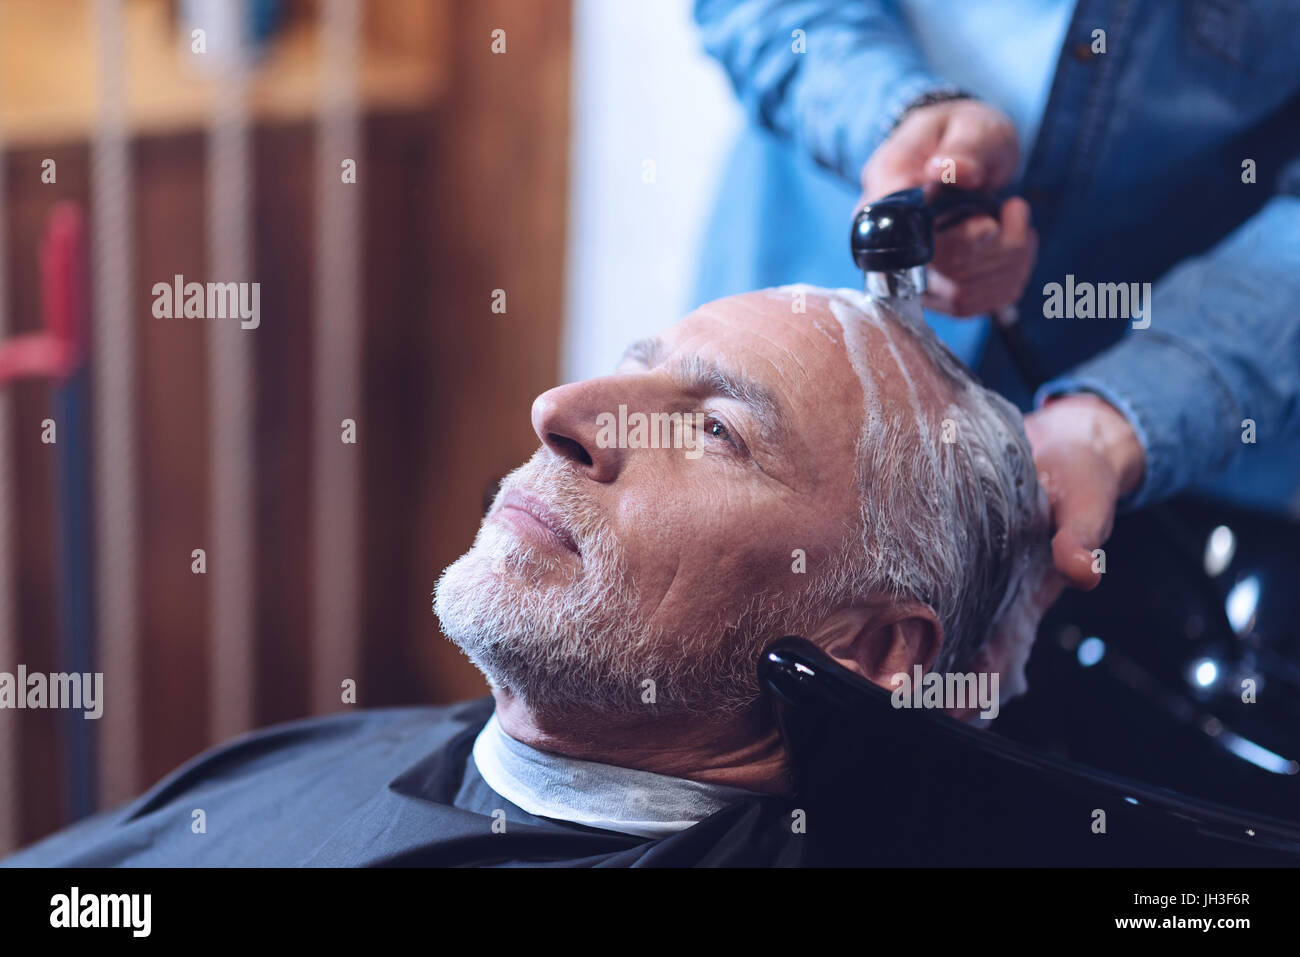 Delighted elderly man having his hair washed Stock Photo